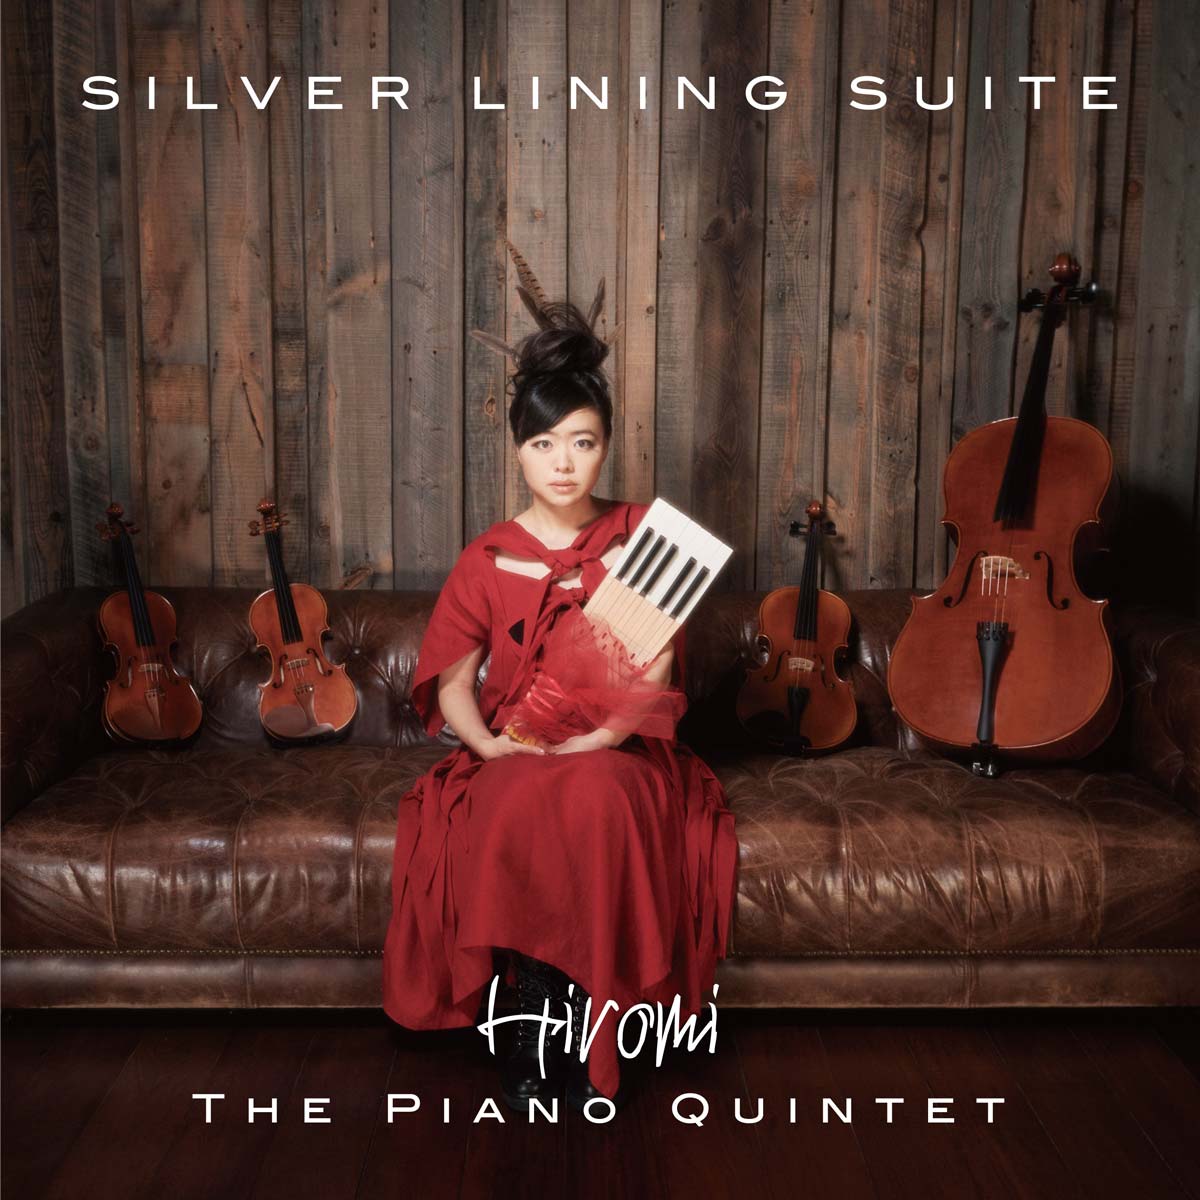 Featured image for “VIRTUOSO PIANIST AND COMPOSER HIROMI REVEALS A VIVID, POIGNANT NEW SUITE FOR PIANO AND STRING QUARTET INSPIRED BY THE EMOTIONAL TOLL OF THE PANDEMIC”